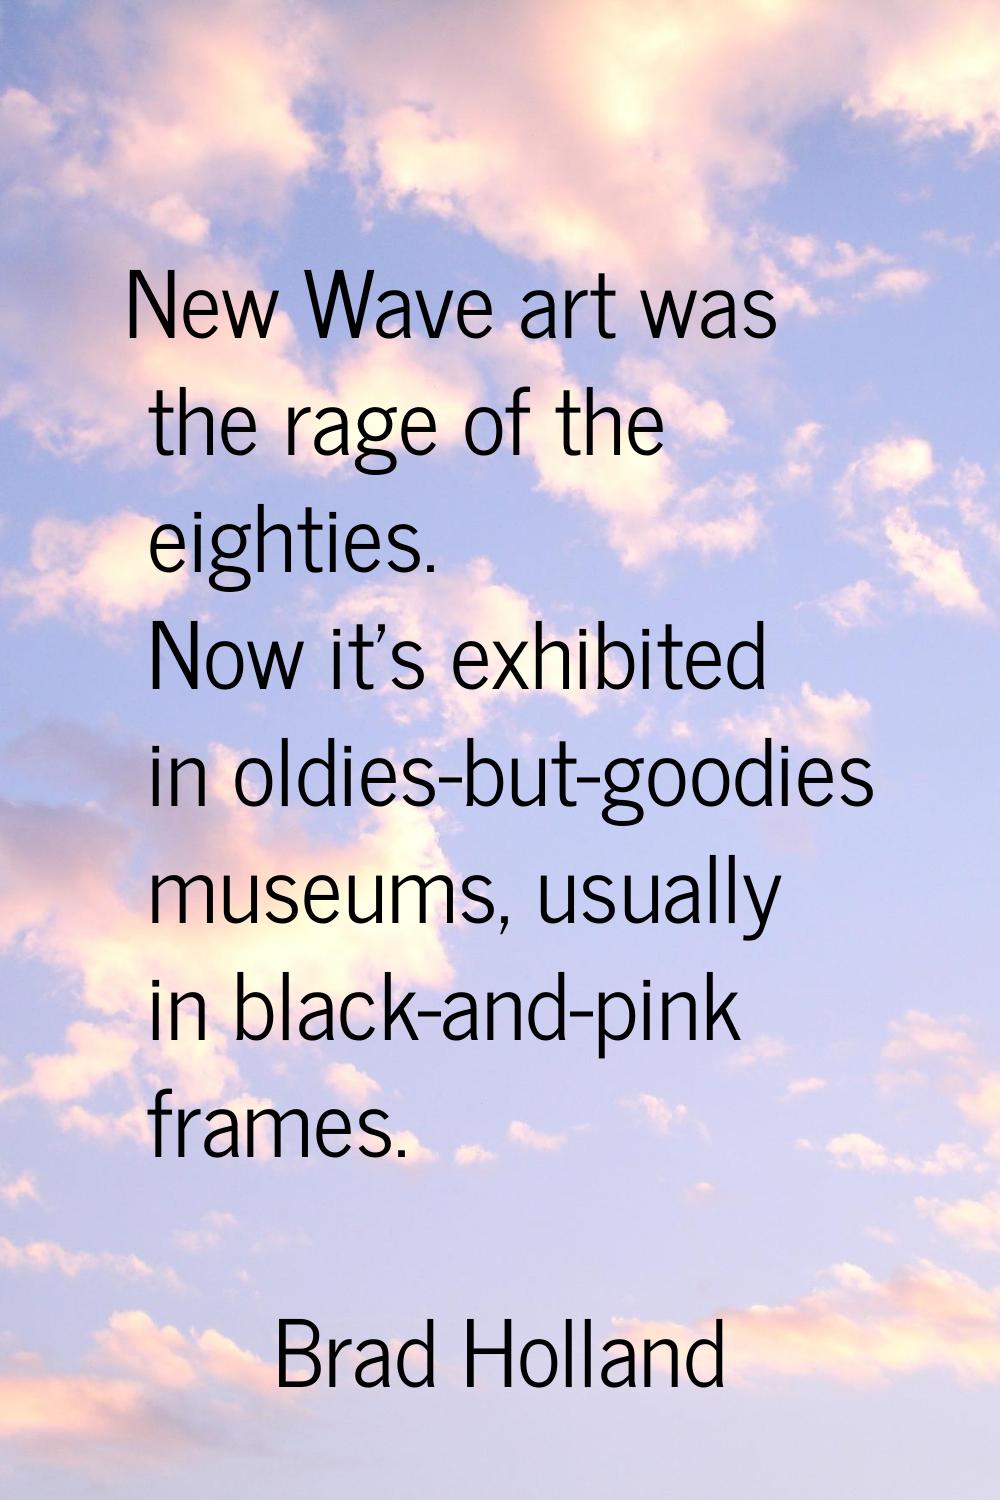 New Wave art was the rage of the eighties. Now it's exhibited in oldies-but-goodies museums, usuall